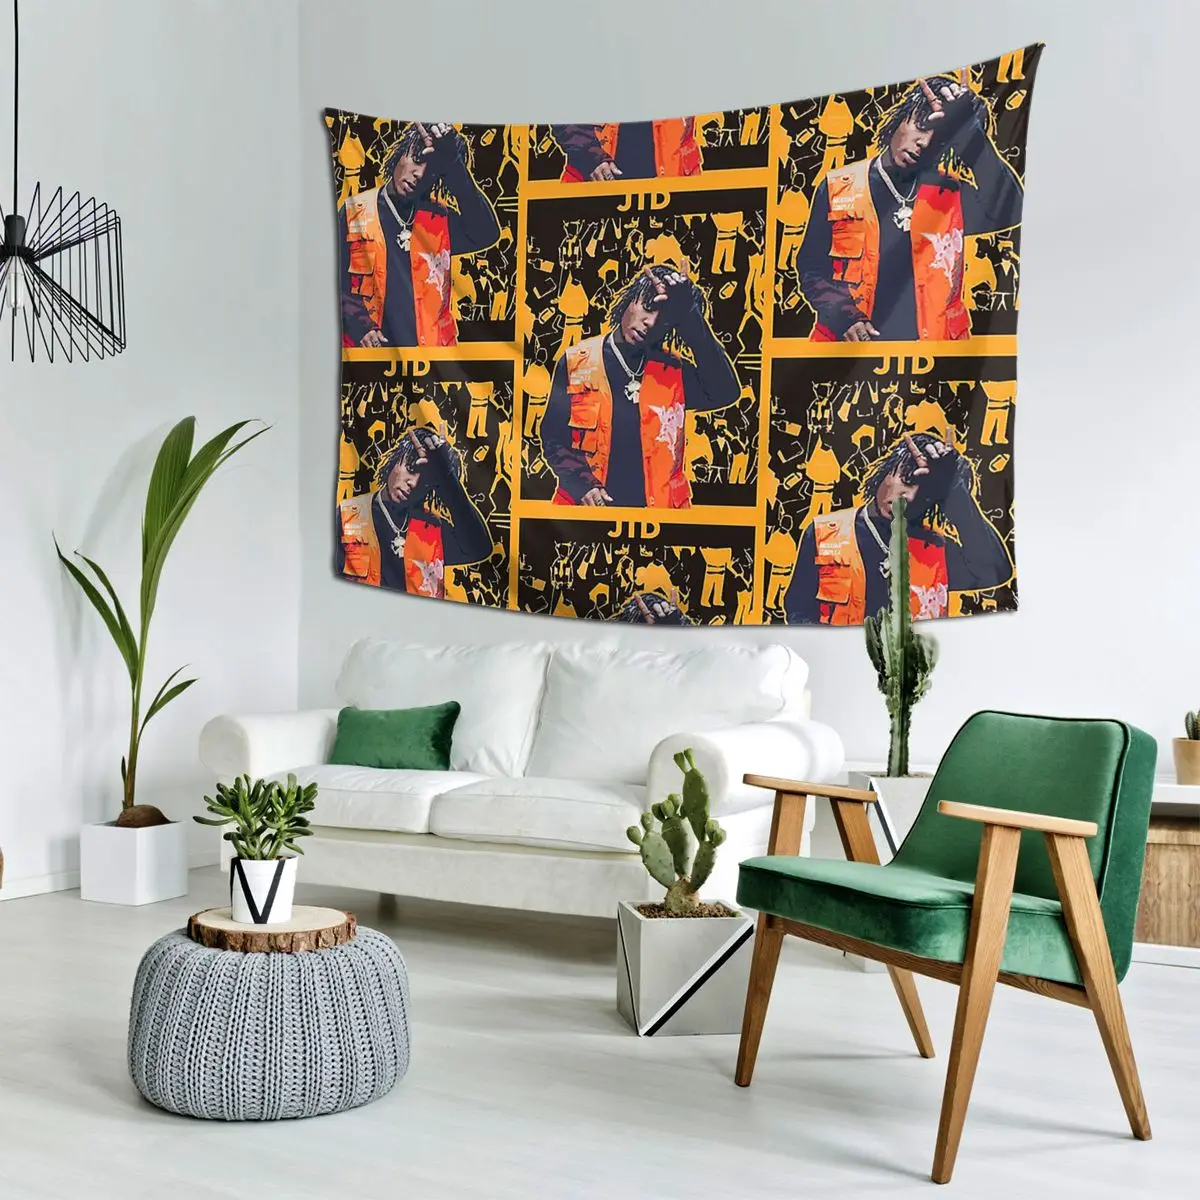 

J I D's The Never Story Tapestry Decoration Art Aesthetic Tapestries for Living Room Bedroom Decor Home Wall Cloth Wall Hanging